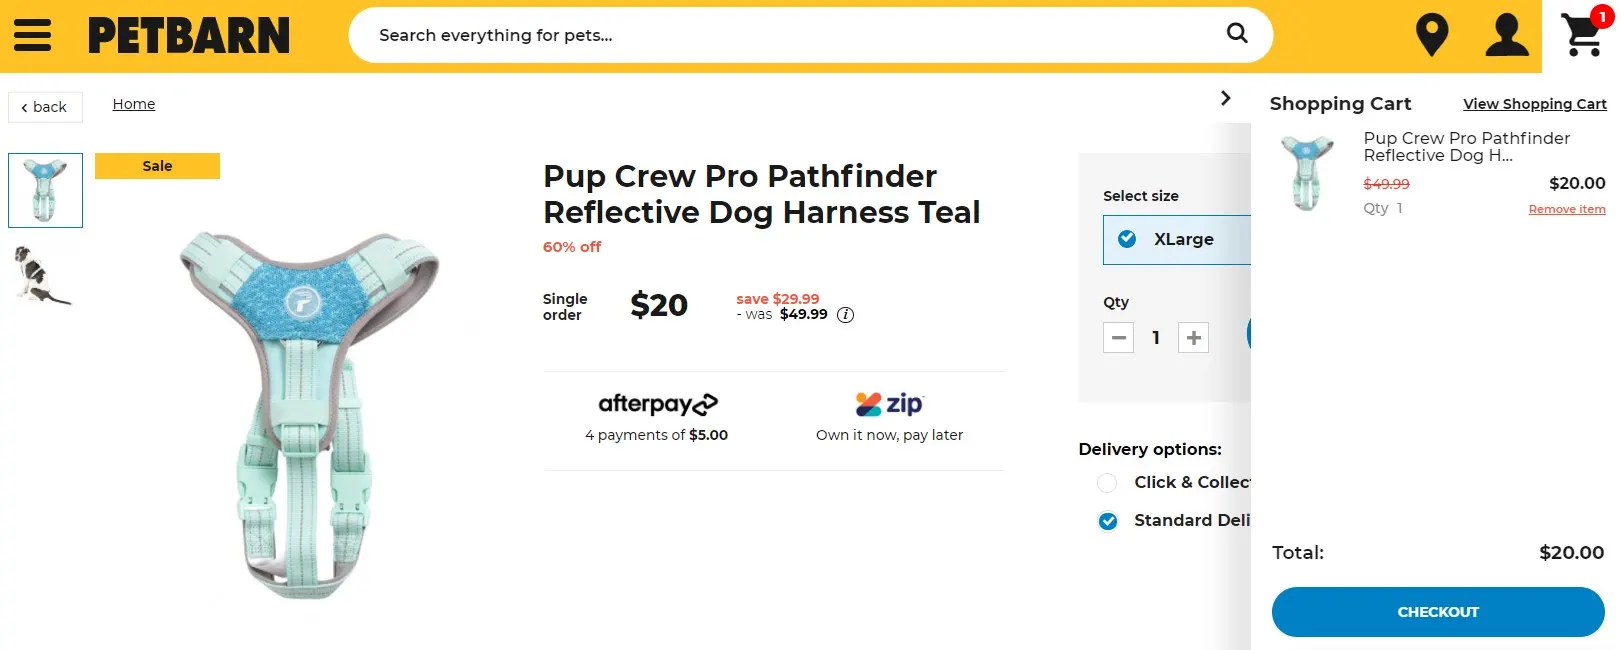 Petbarn product checkout | Finder AU